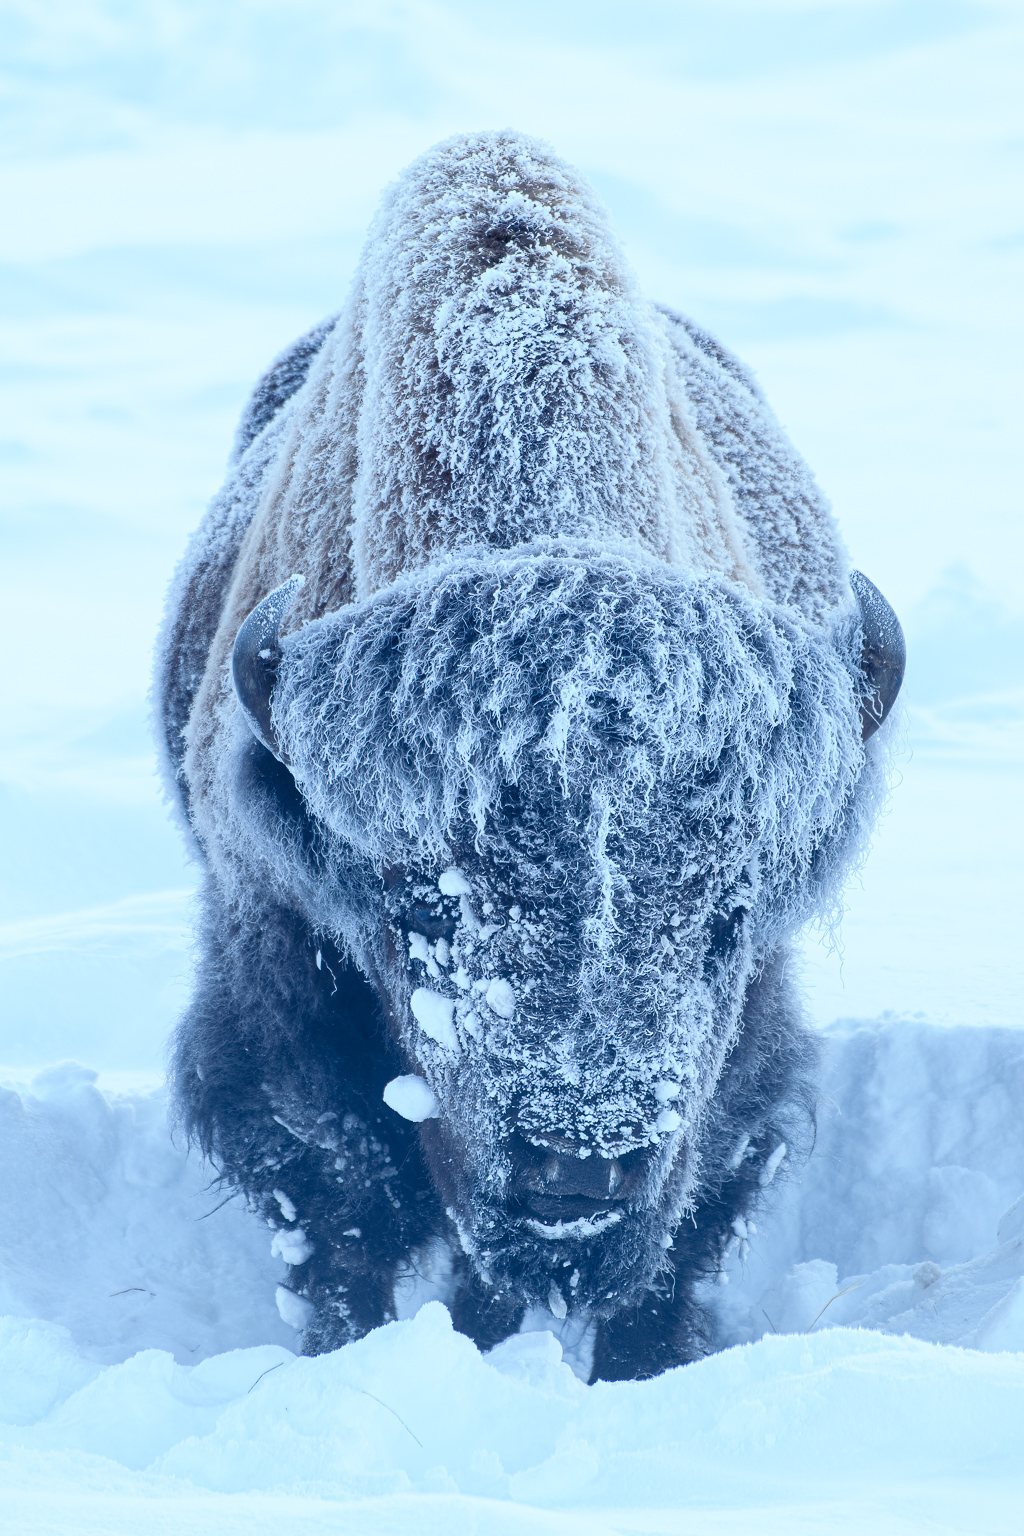 frost and snow covered Bison standing head on in Yellowstone Park. Taken by Ian Mears